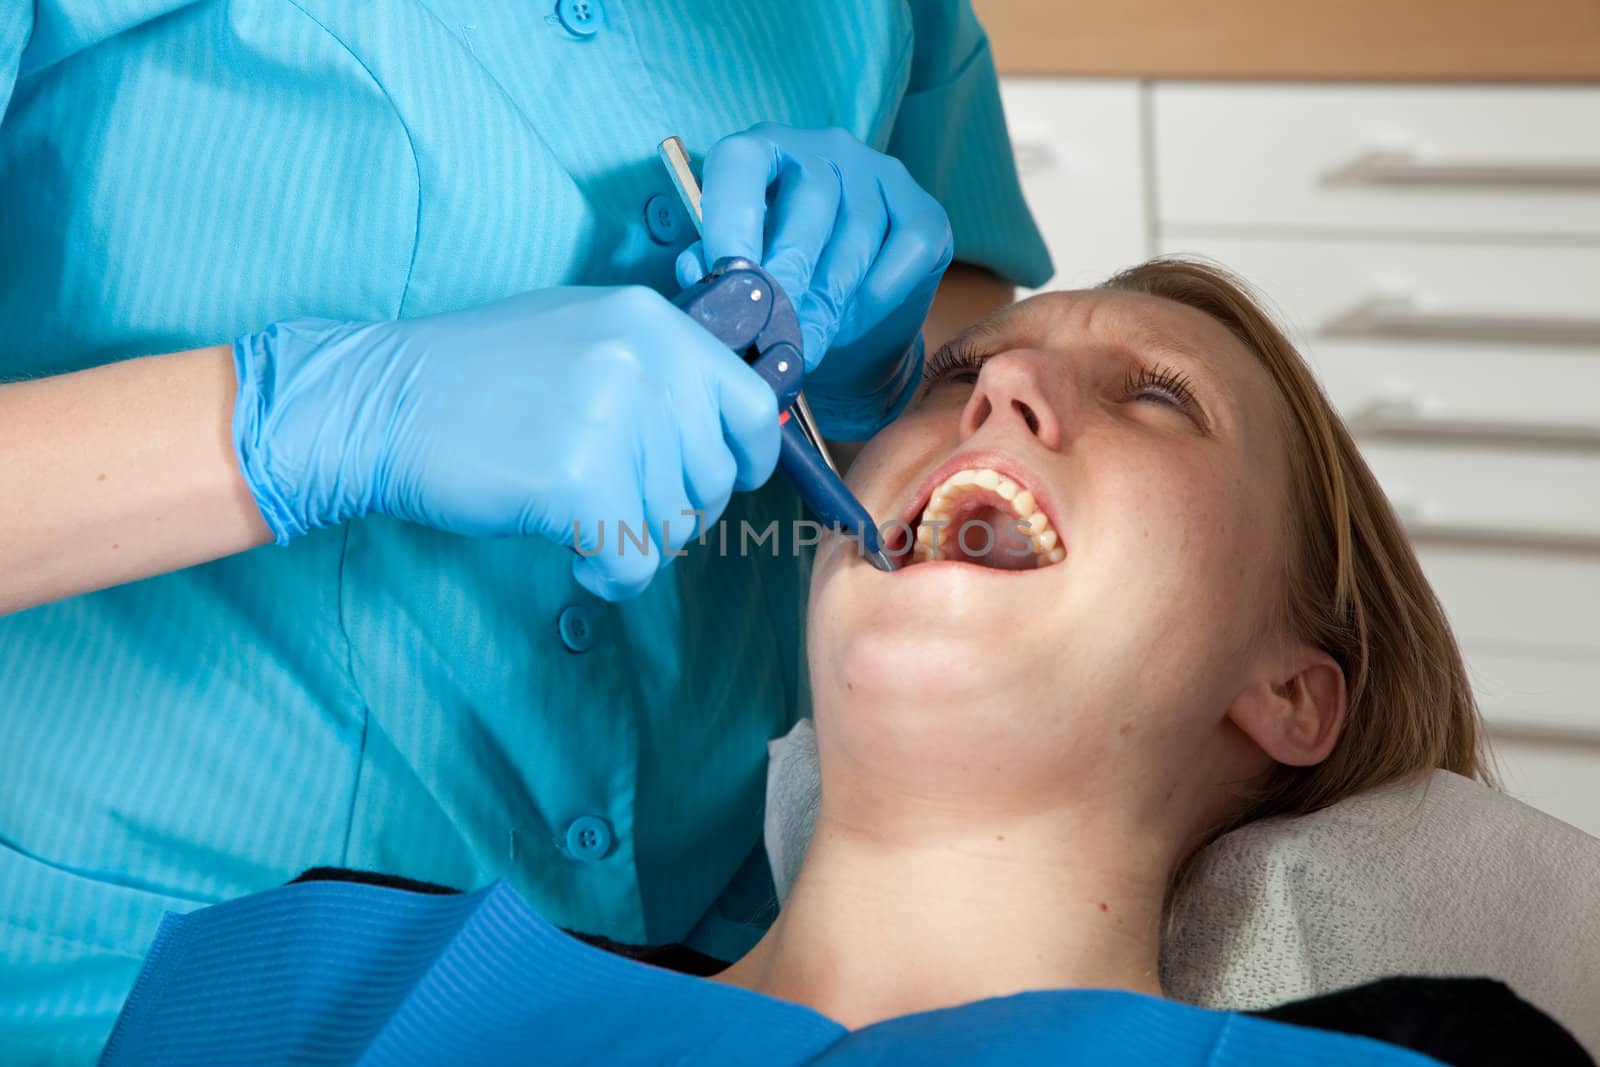 Patient at the dentist looking painful